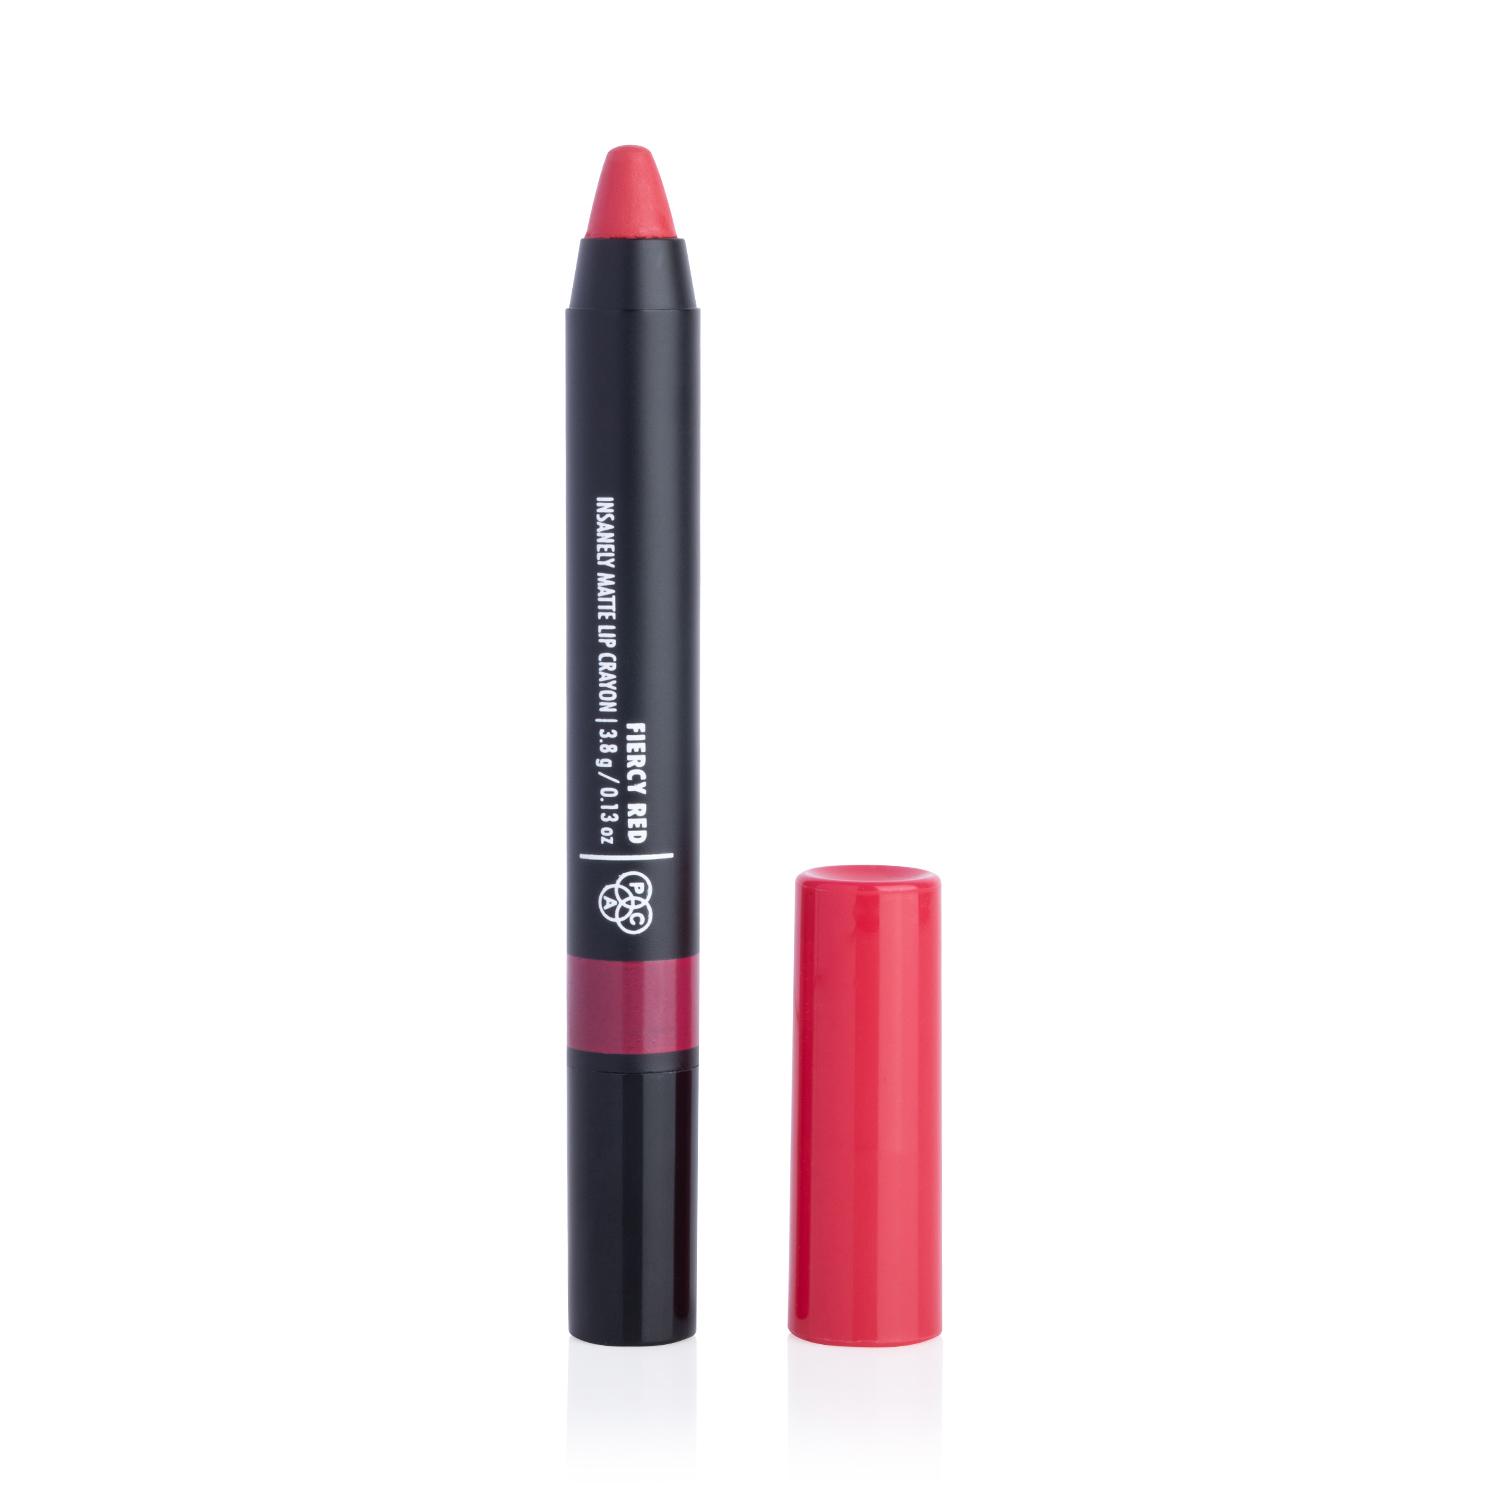 PAC | PAC Insanely Matte Lip Crayon - Fiercy Red (3.8g)